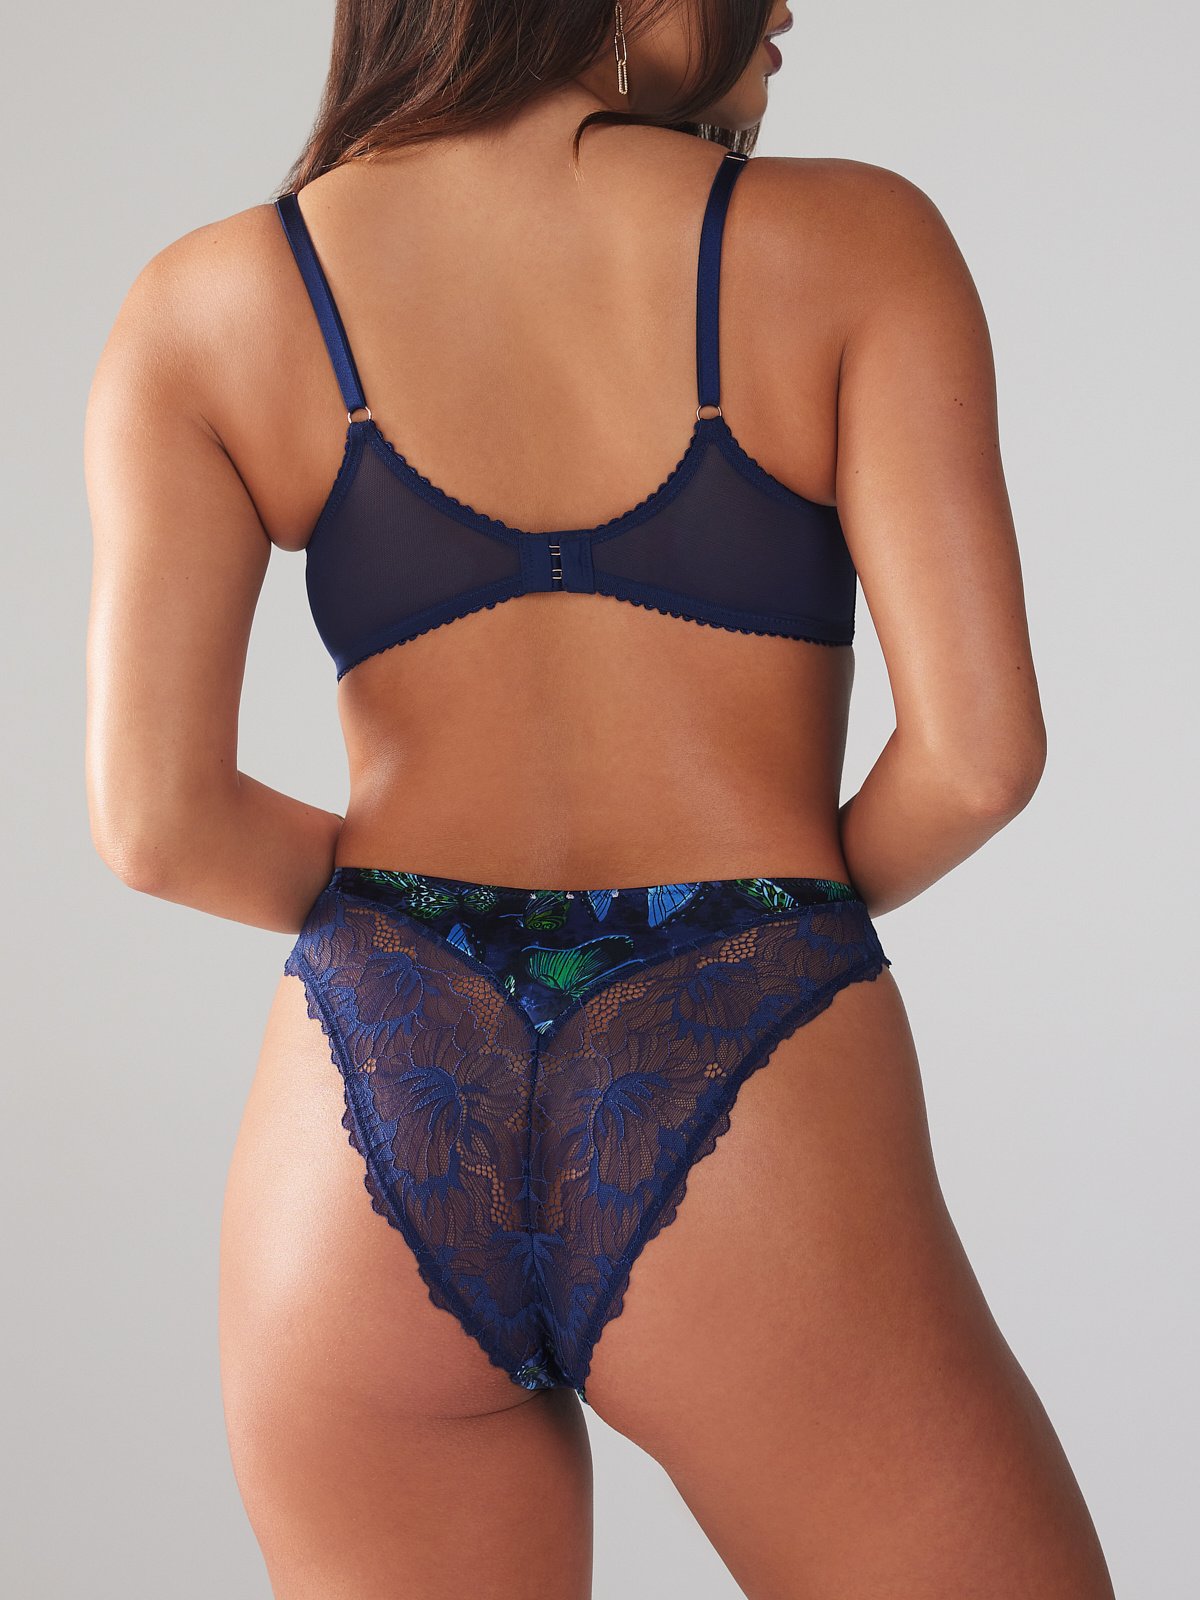 Sexy Butterfly Lace Thong Low Waist Lace Cheeky Panties